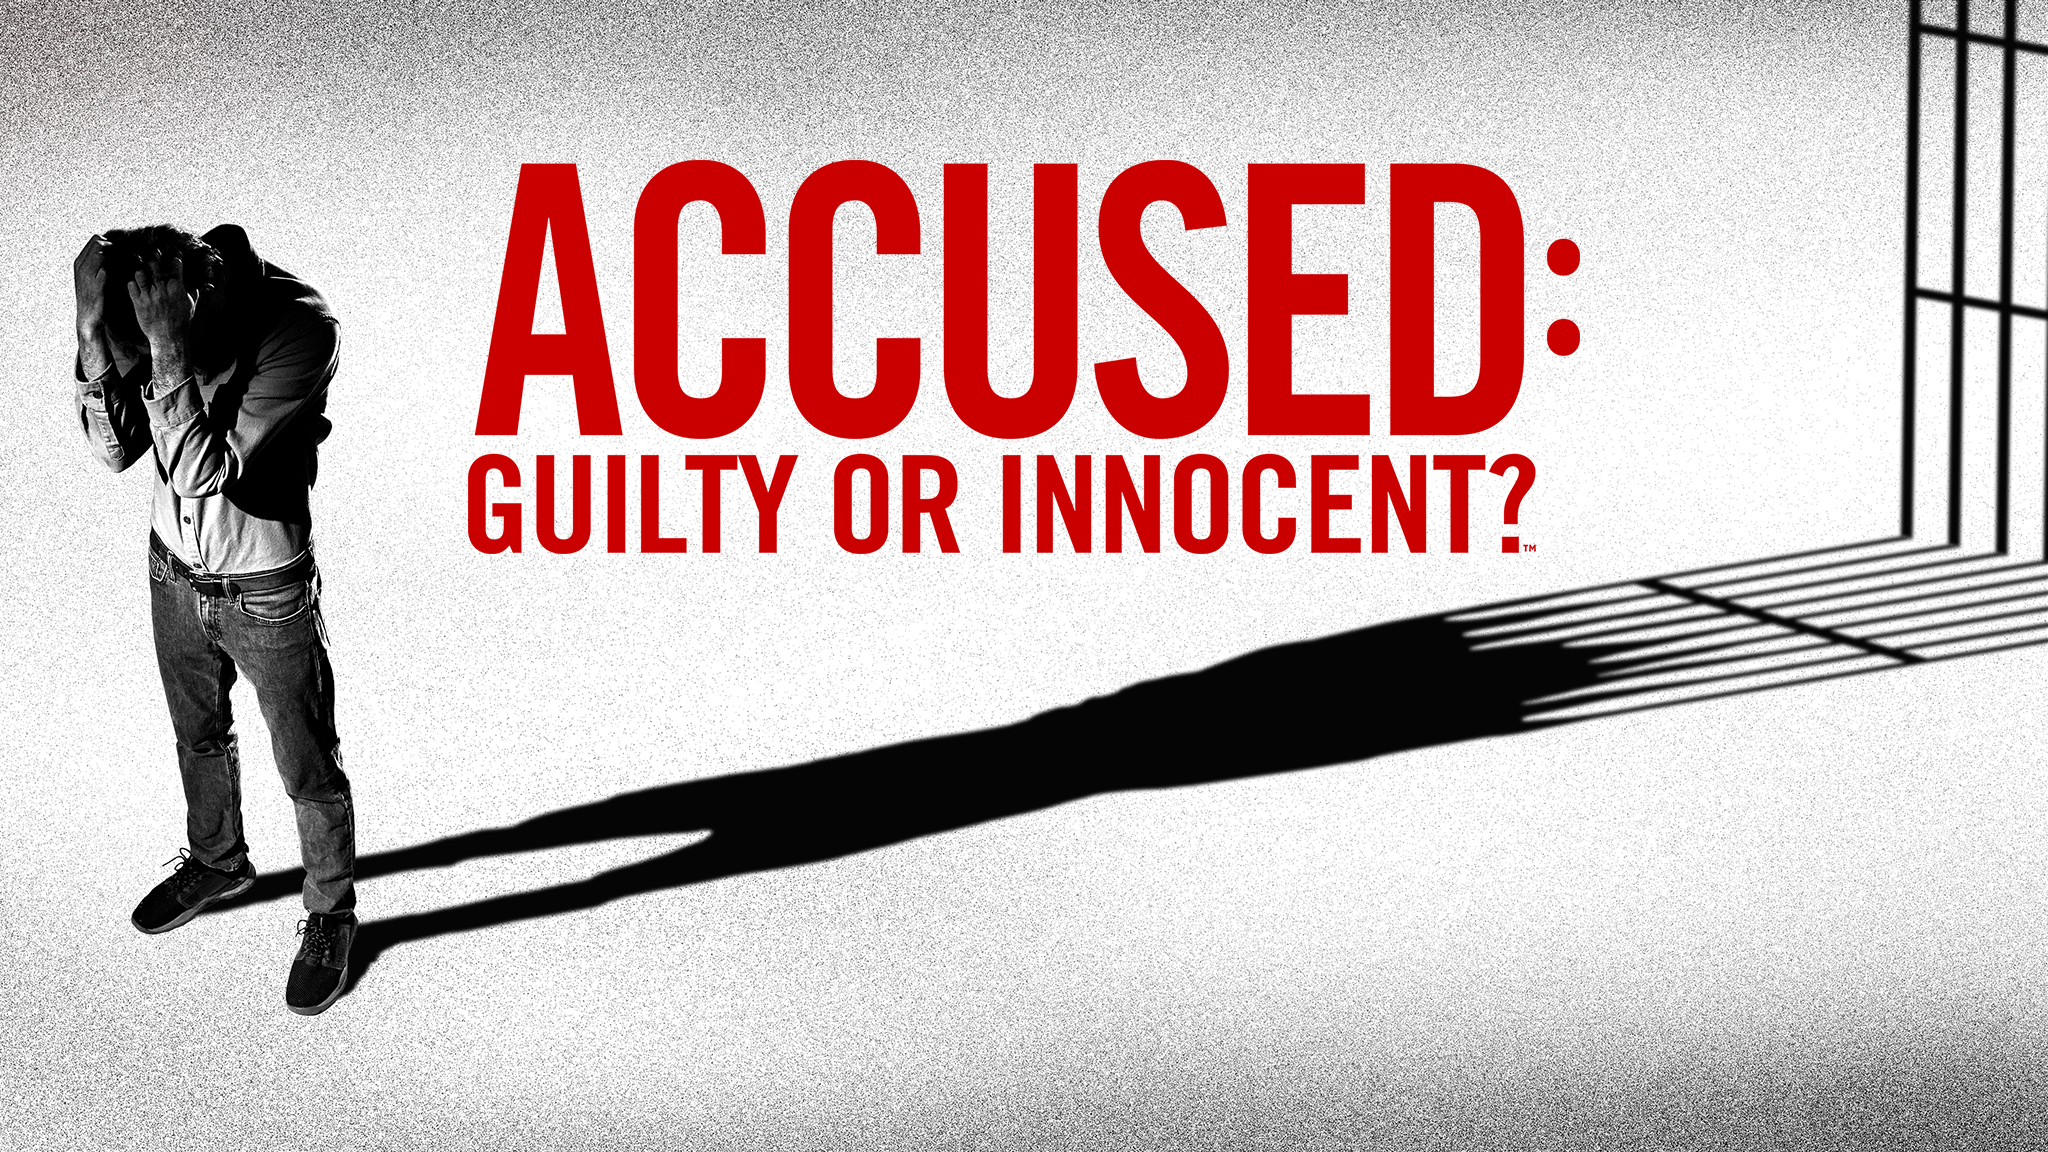 A&E's Groundbreaking Documentary Series 'Accused: Guilty or Innocent?' Returns Thursday, January 12